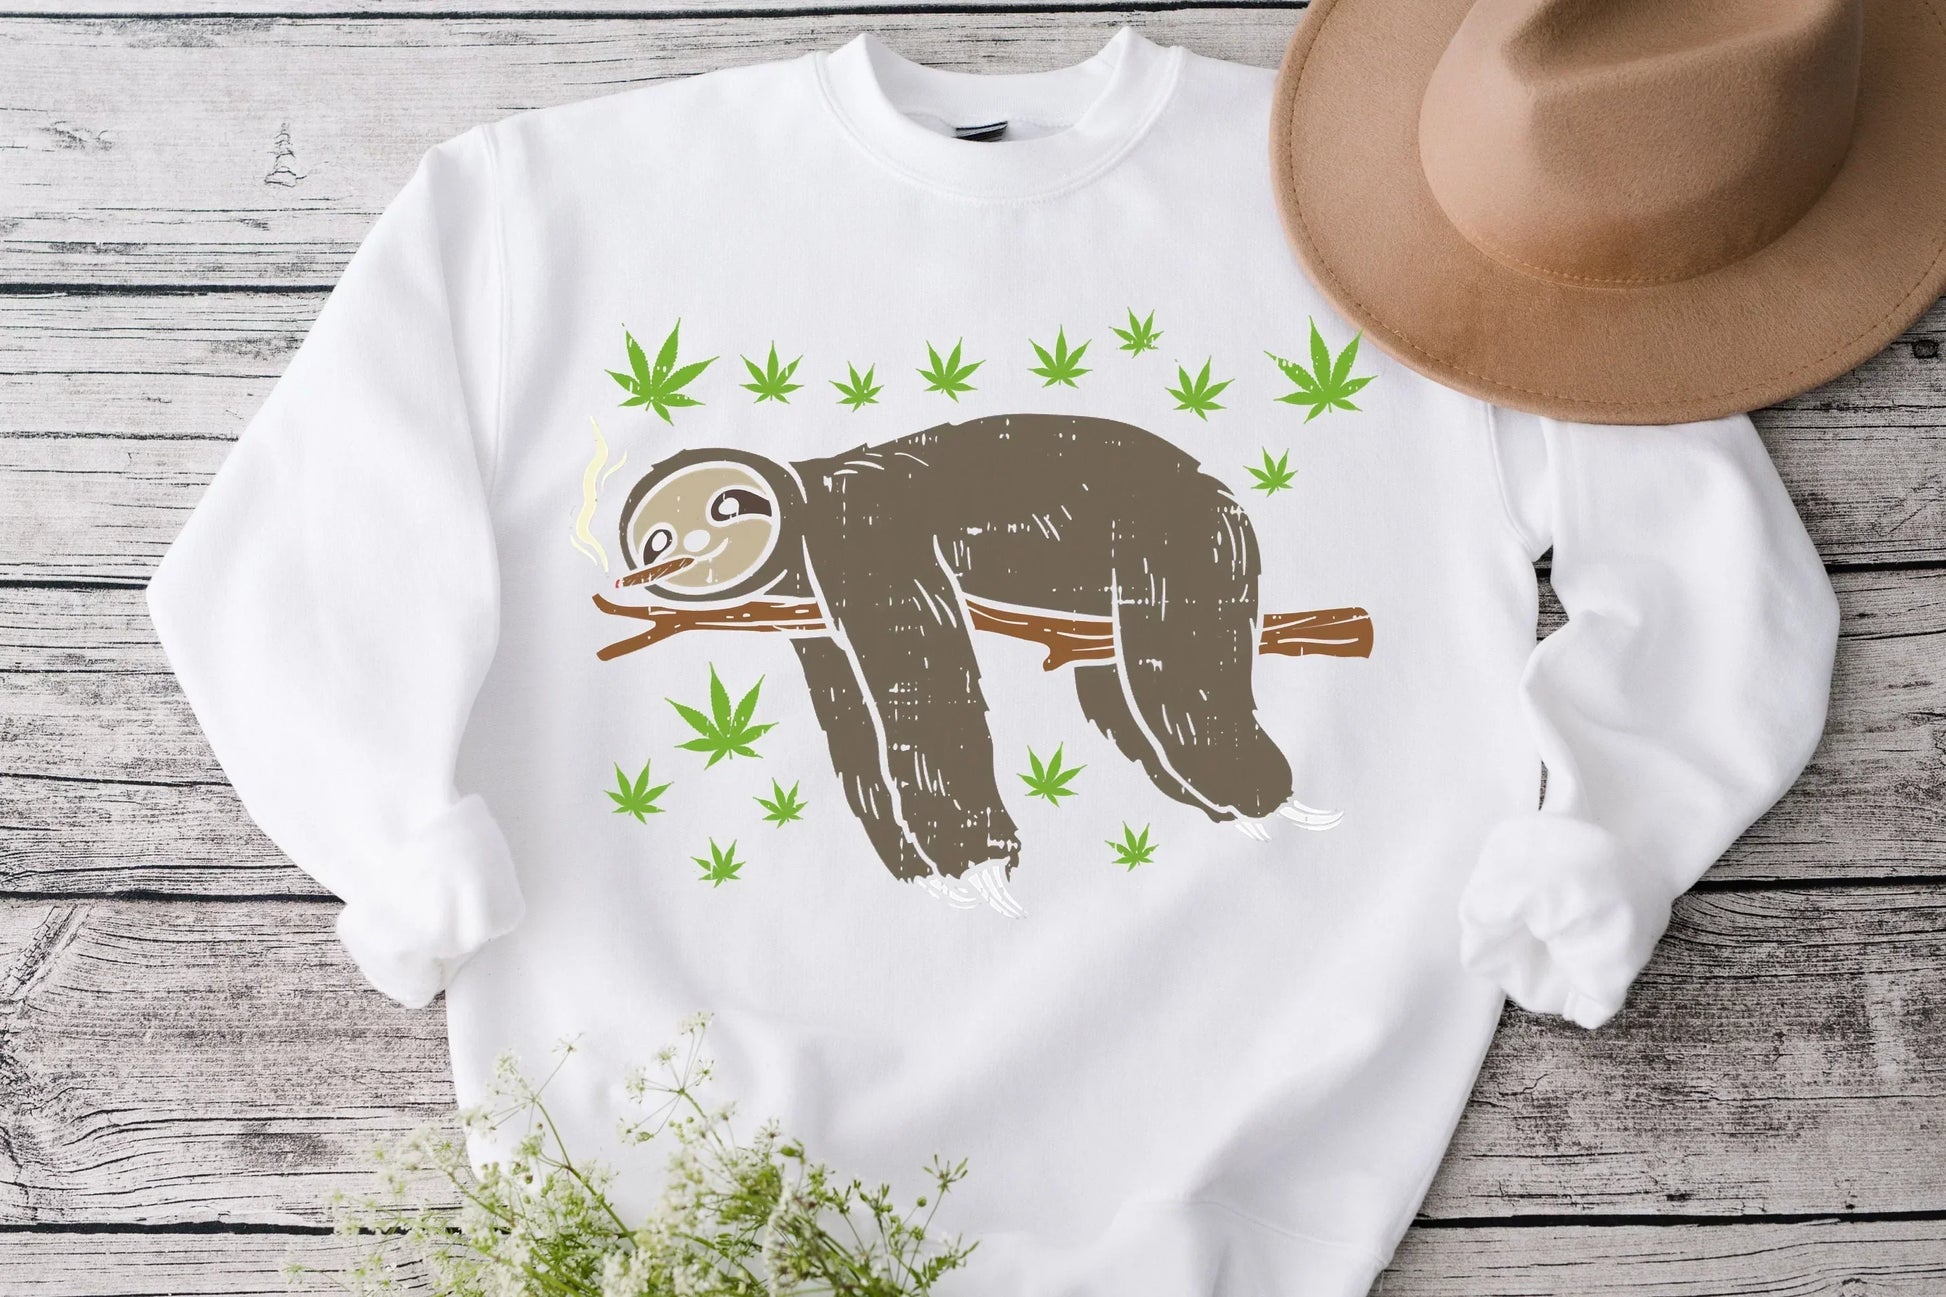 Stoner Gifts, Hippie Clothes, Weed Gifts, Weed Shirt, Sloth Gift, Stoner Girl, Stoner Gift for Him, Stoner Gift for Her, Marijuana T shirts